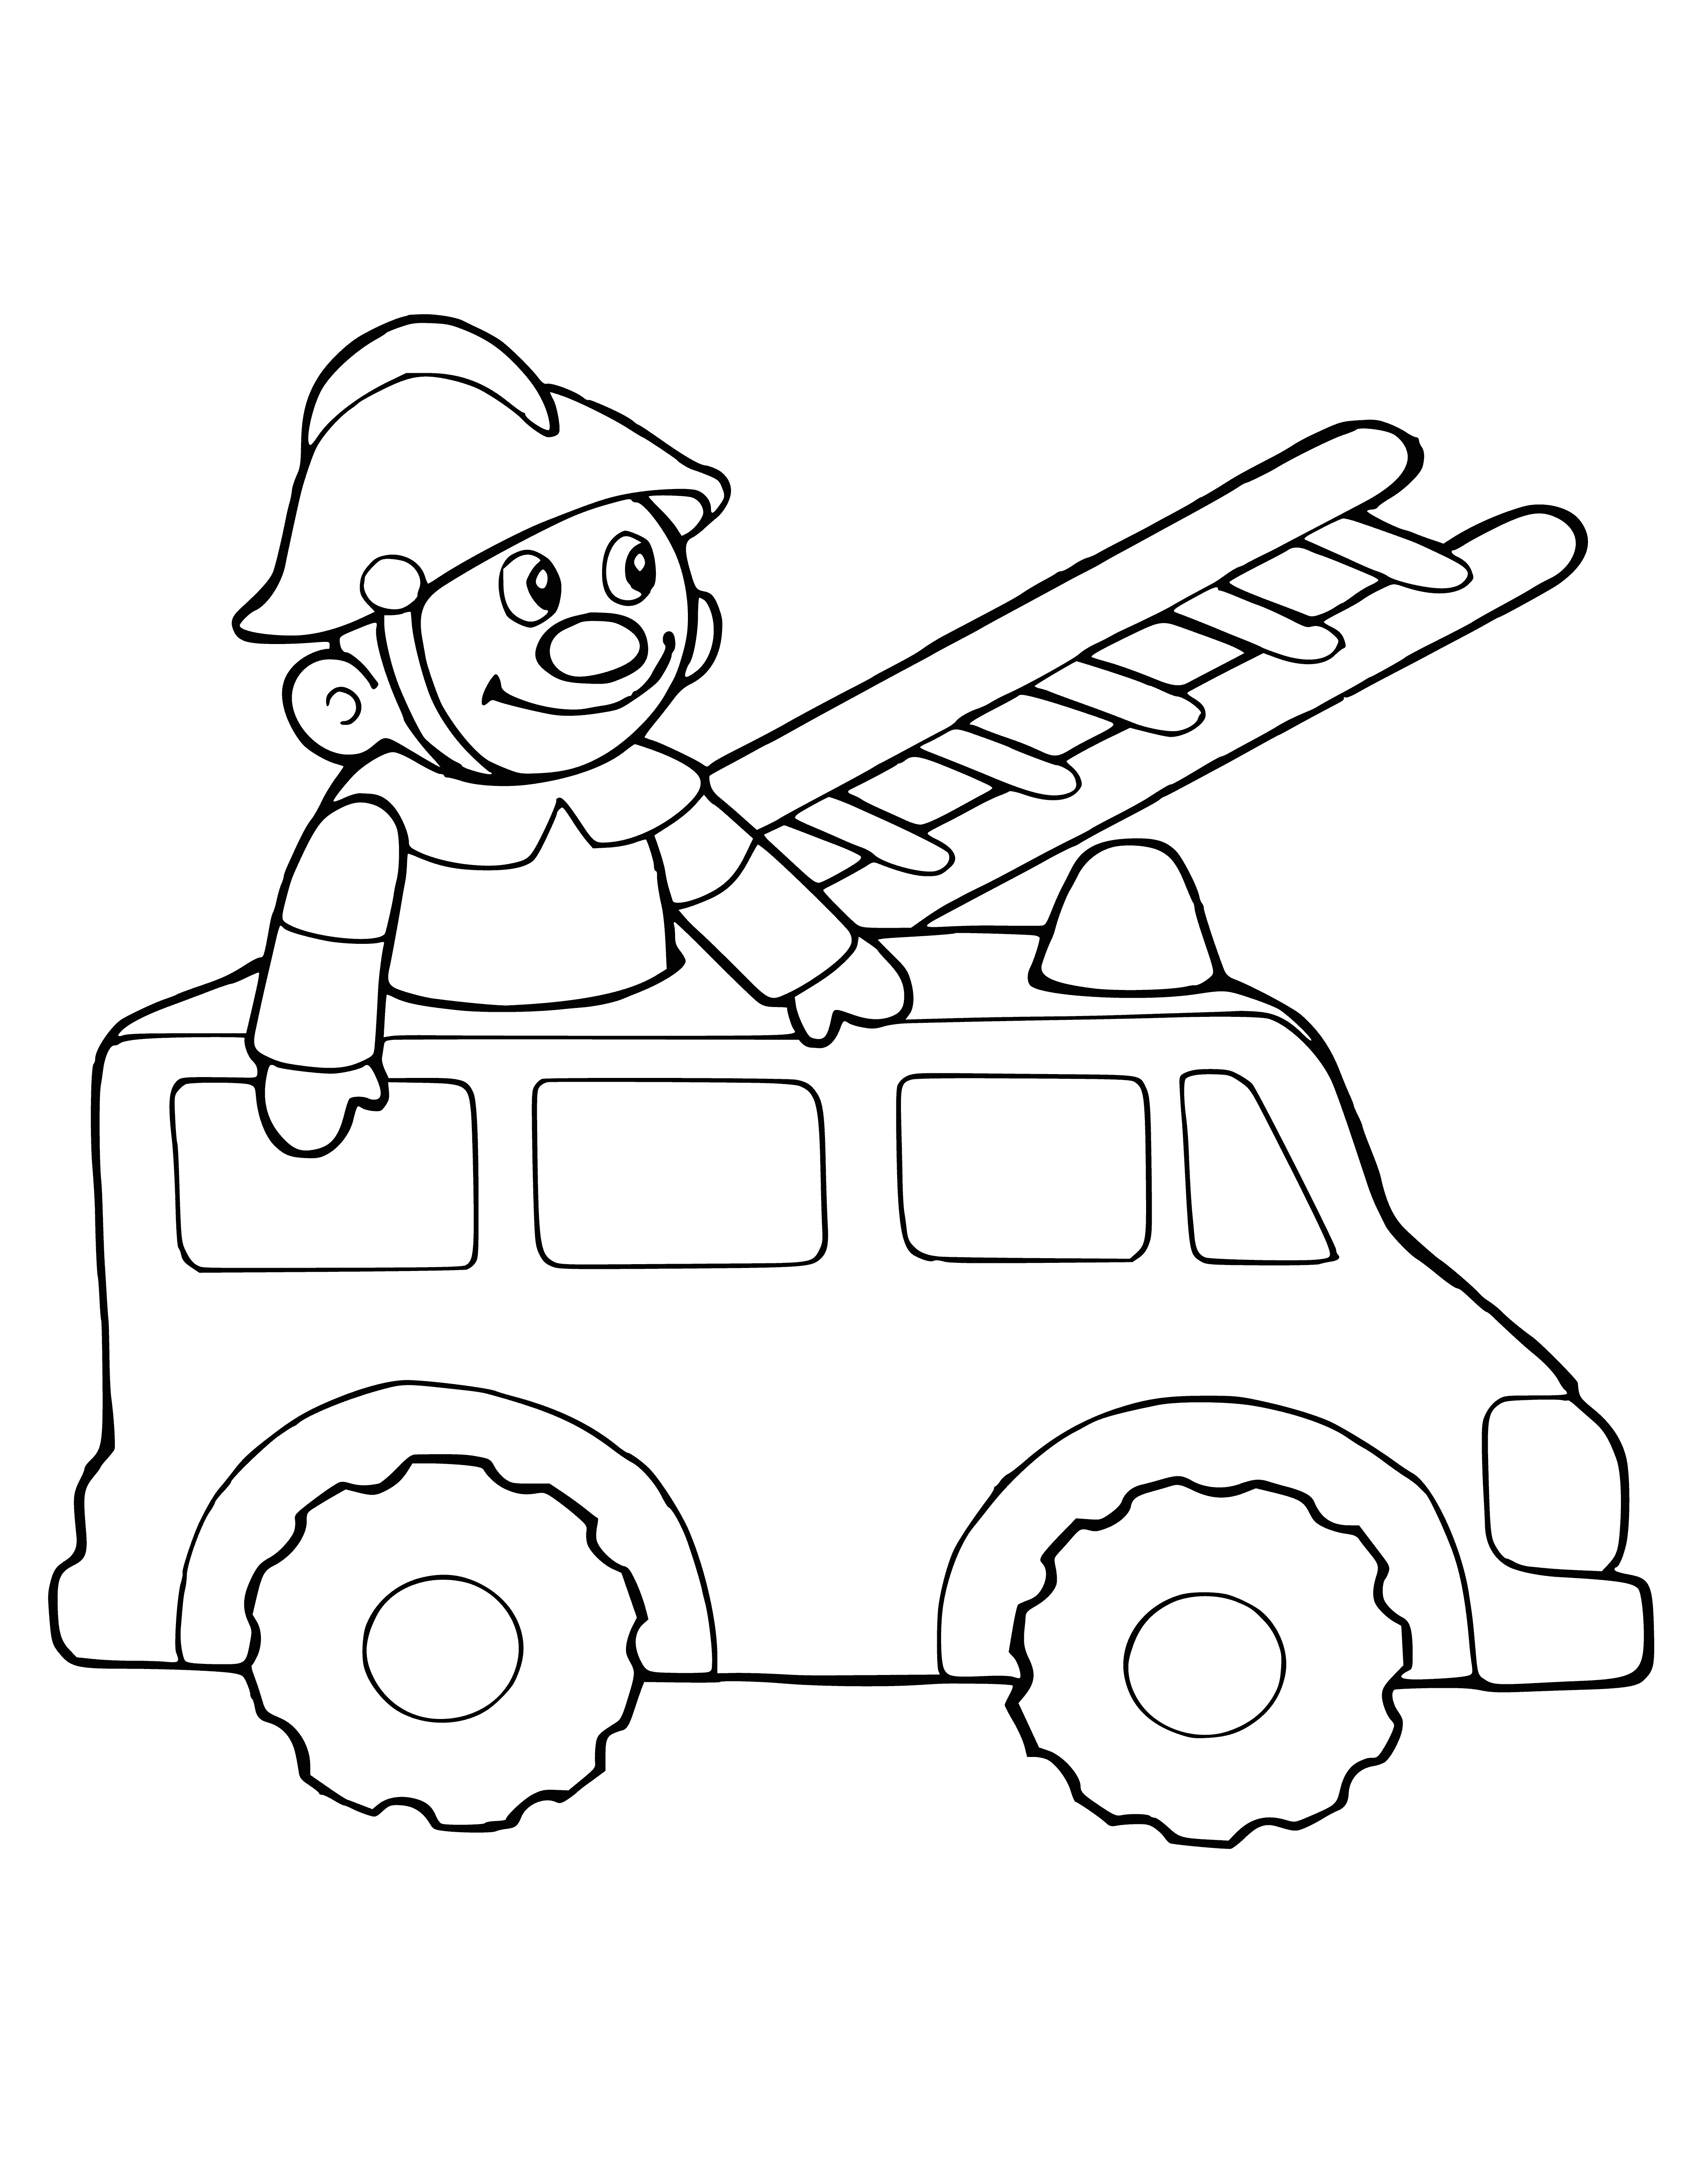 coloring page: Red fire truck w/ ladder, hose, water cannon & siren on roof - perfect for little firefighters!